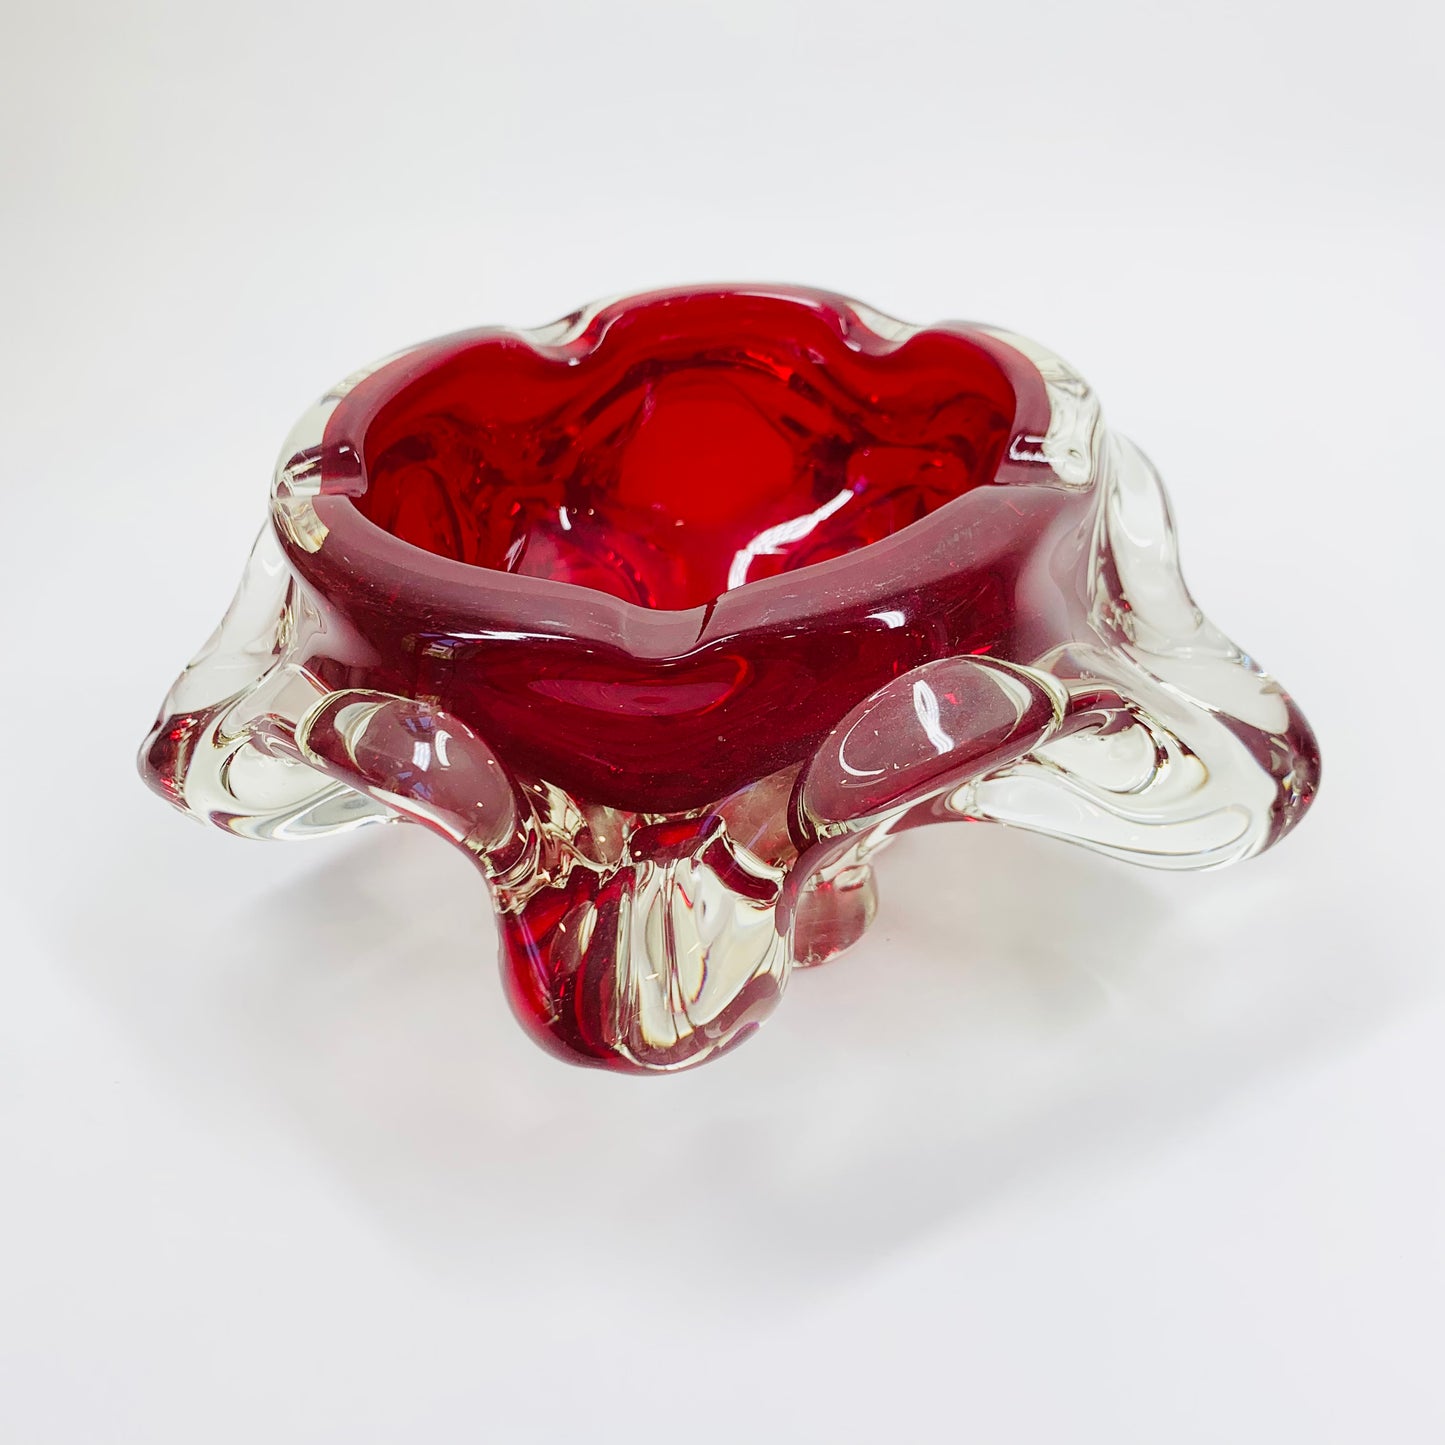 Space Age red Murano sommerso glass ashtray/bowl